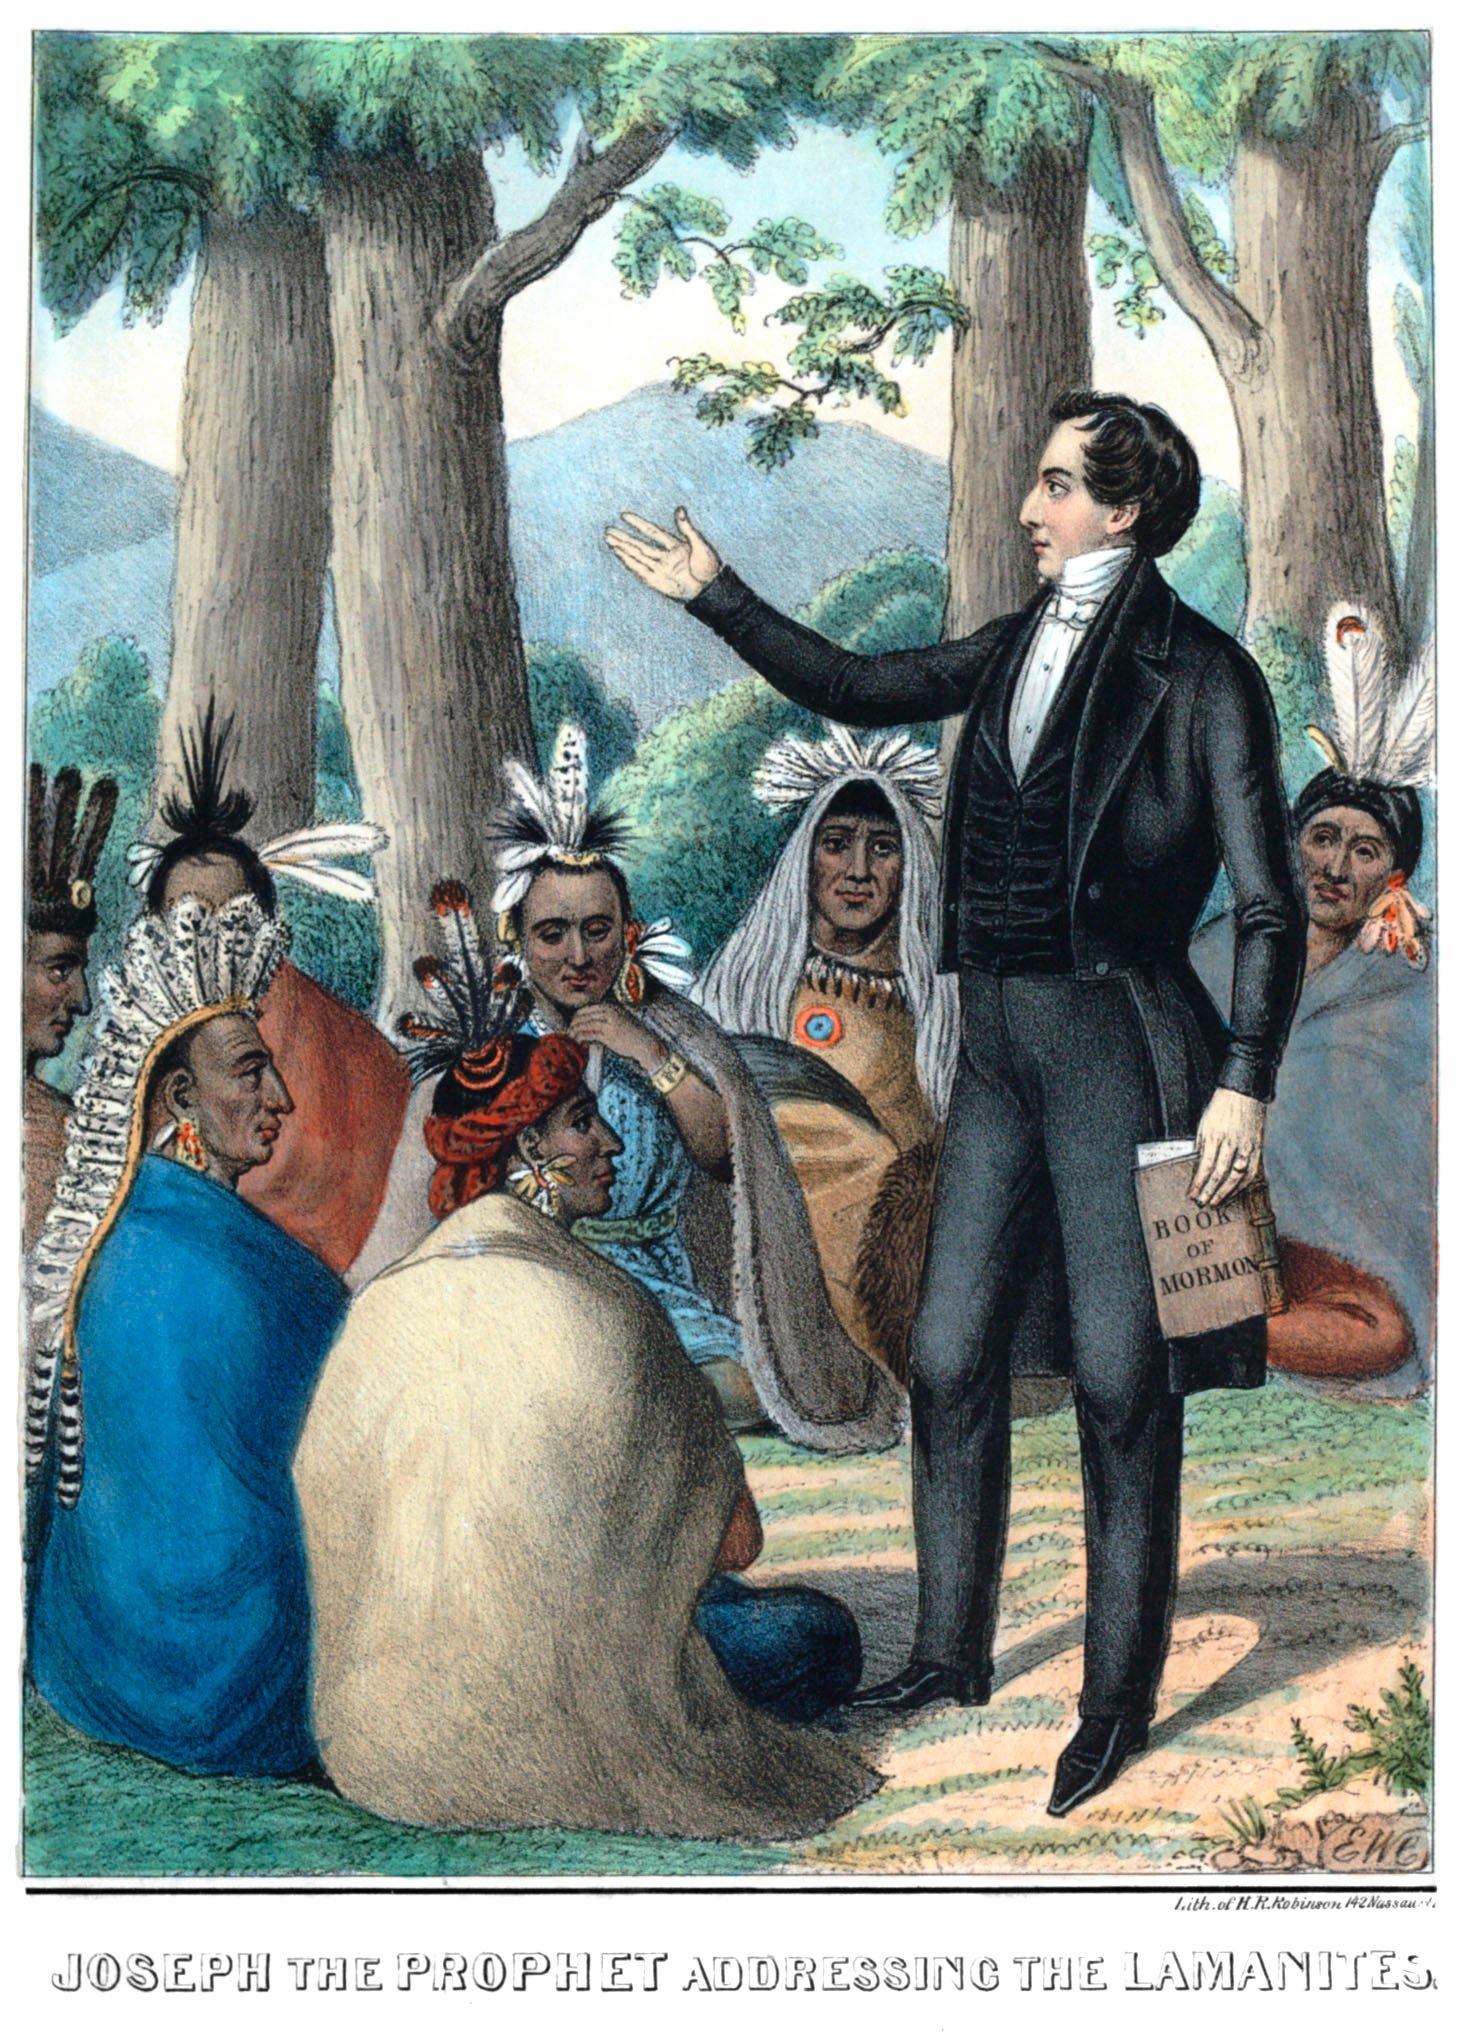 An 1844 color lithograph print by Edward Williams Clay and Henry R. Robinson depicting Joseph Smith Junior holding a copy of the Book of Mormon and reaching out to a group of Native american Indians, subtitled "Joseph the Prophet Addressing the Lamanites."